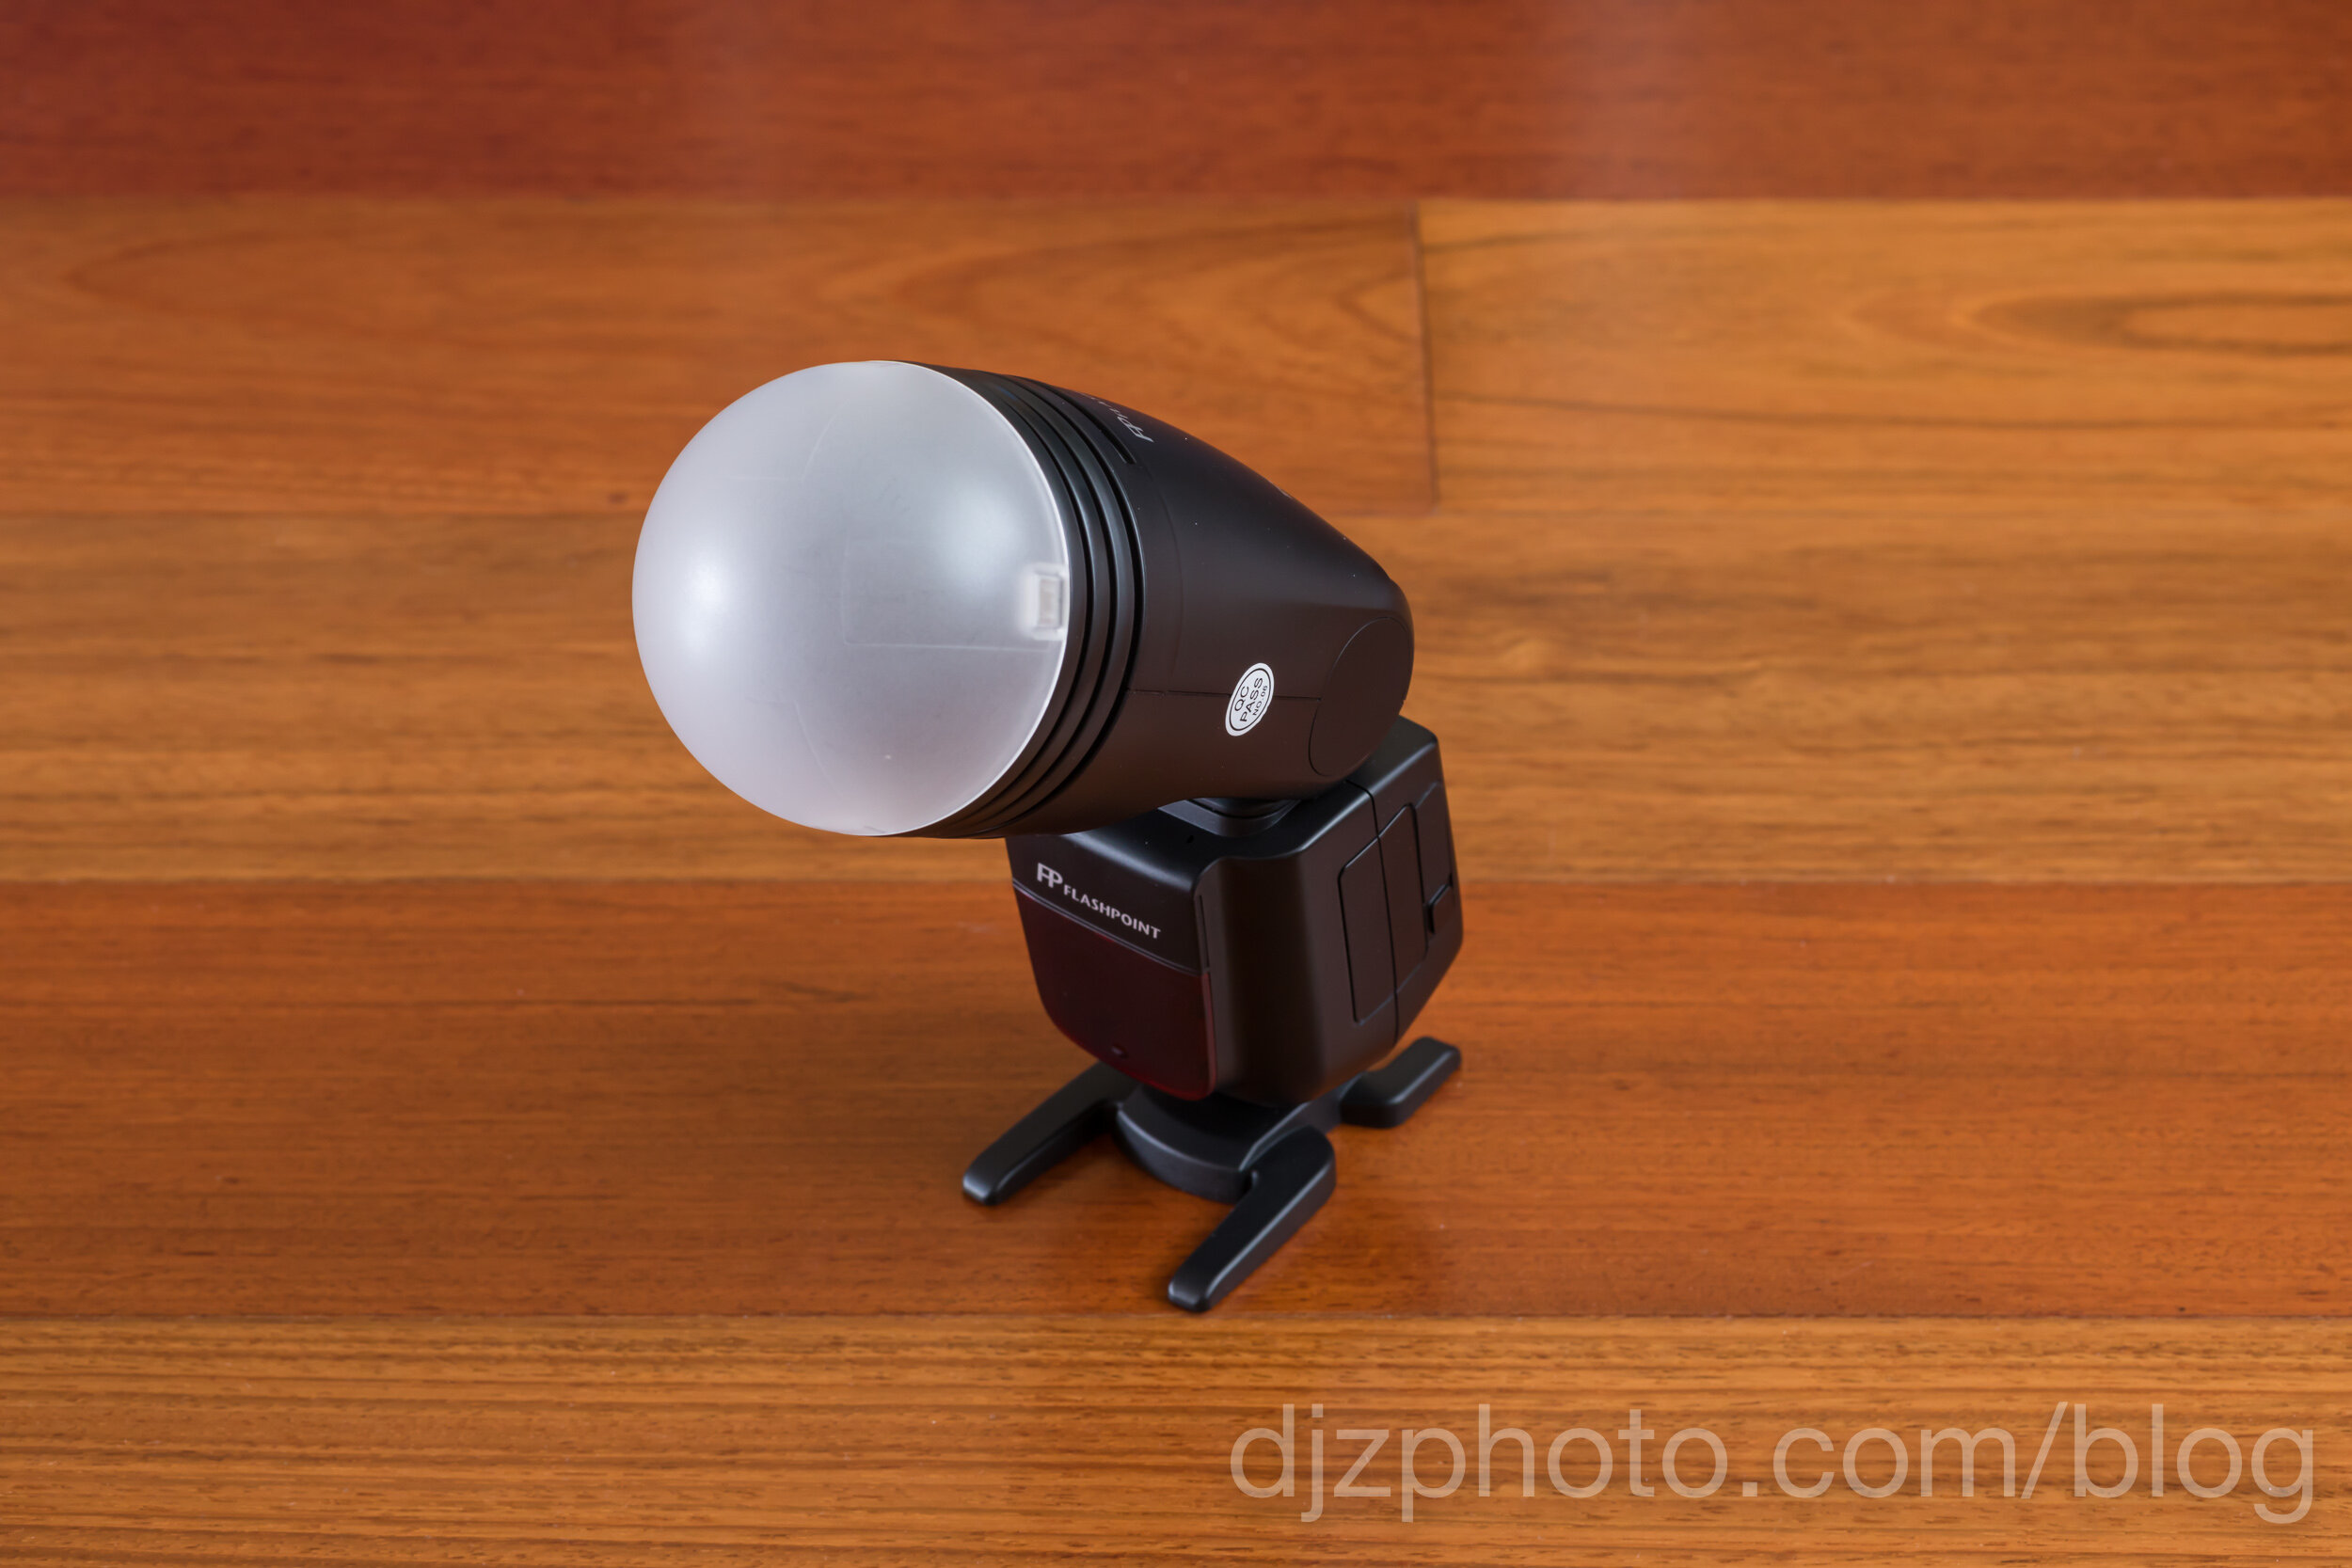 Godox V1 Flash with Accessories Kit for Sony